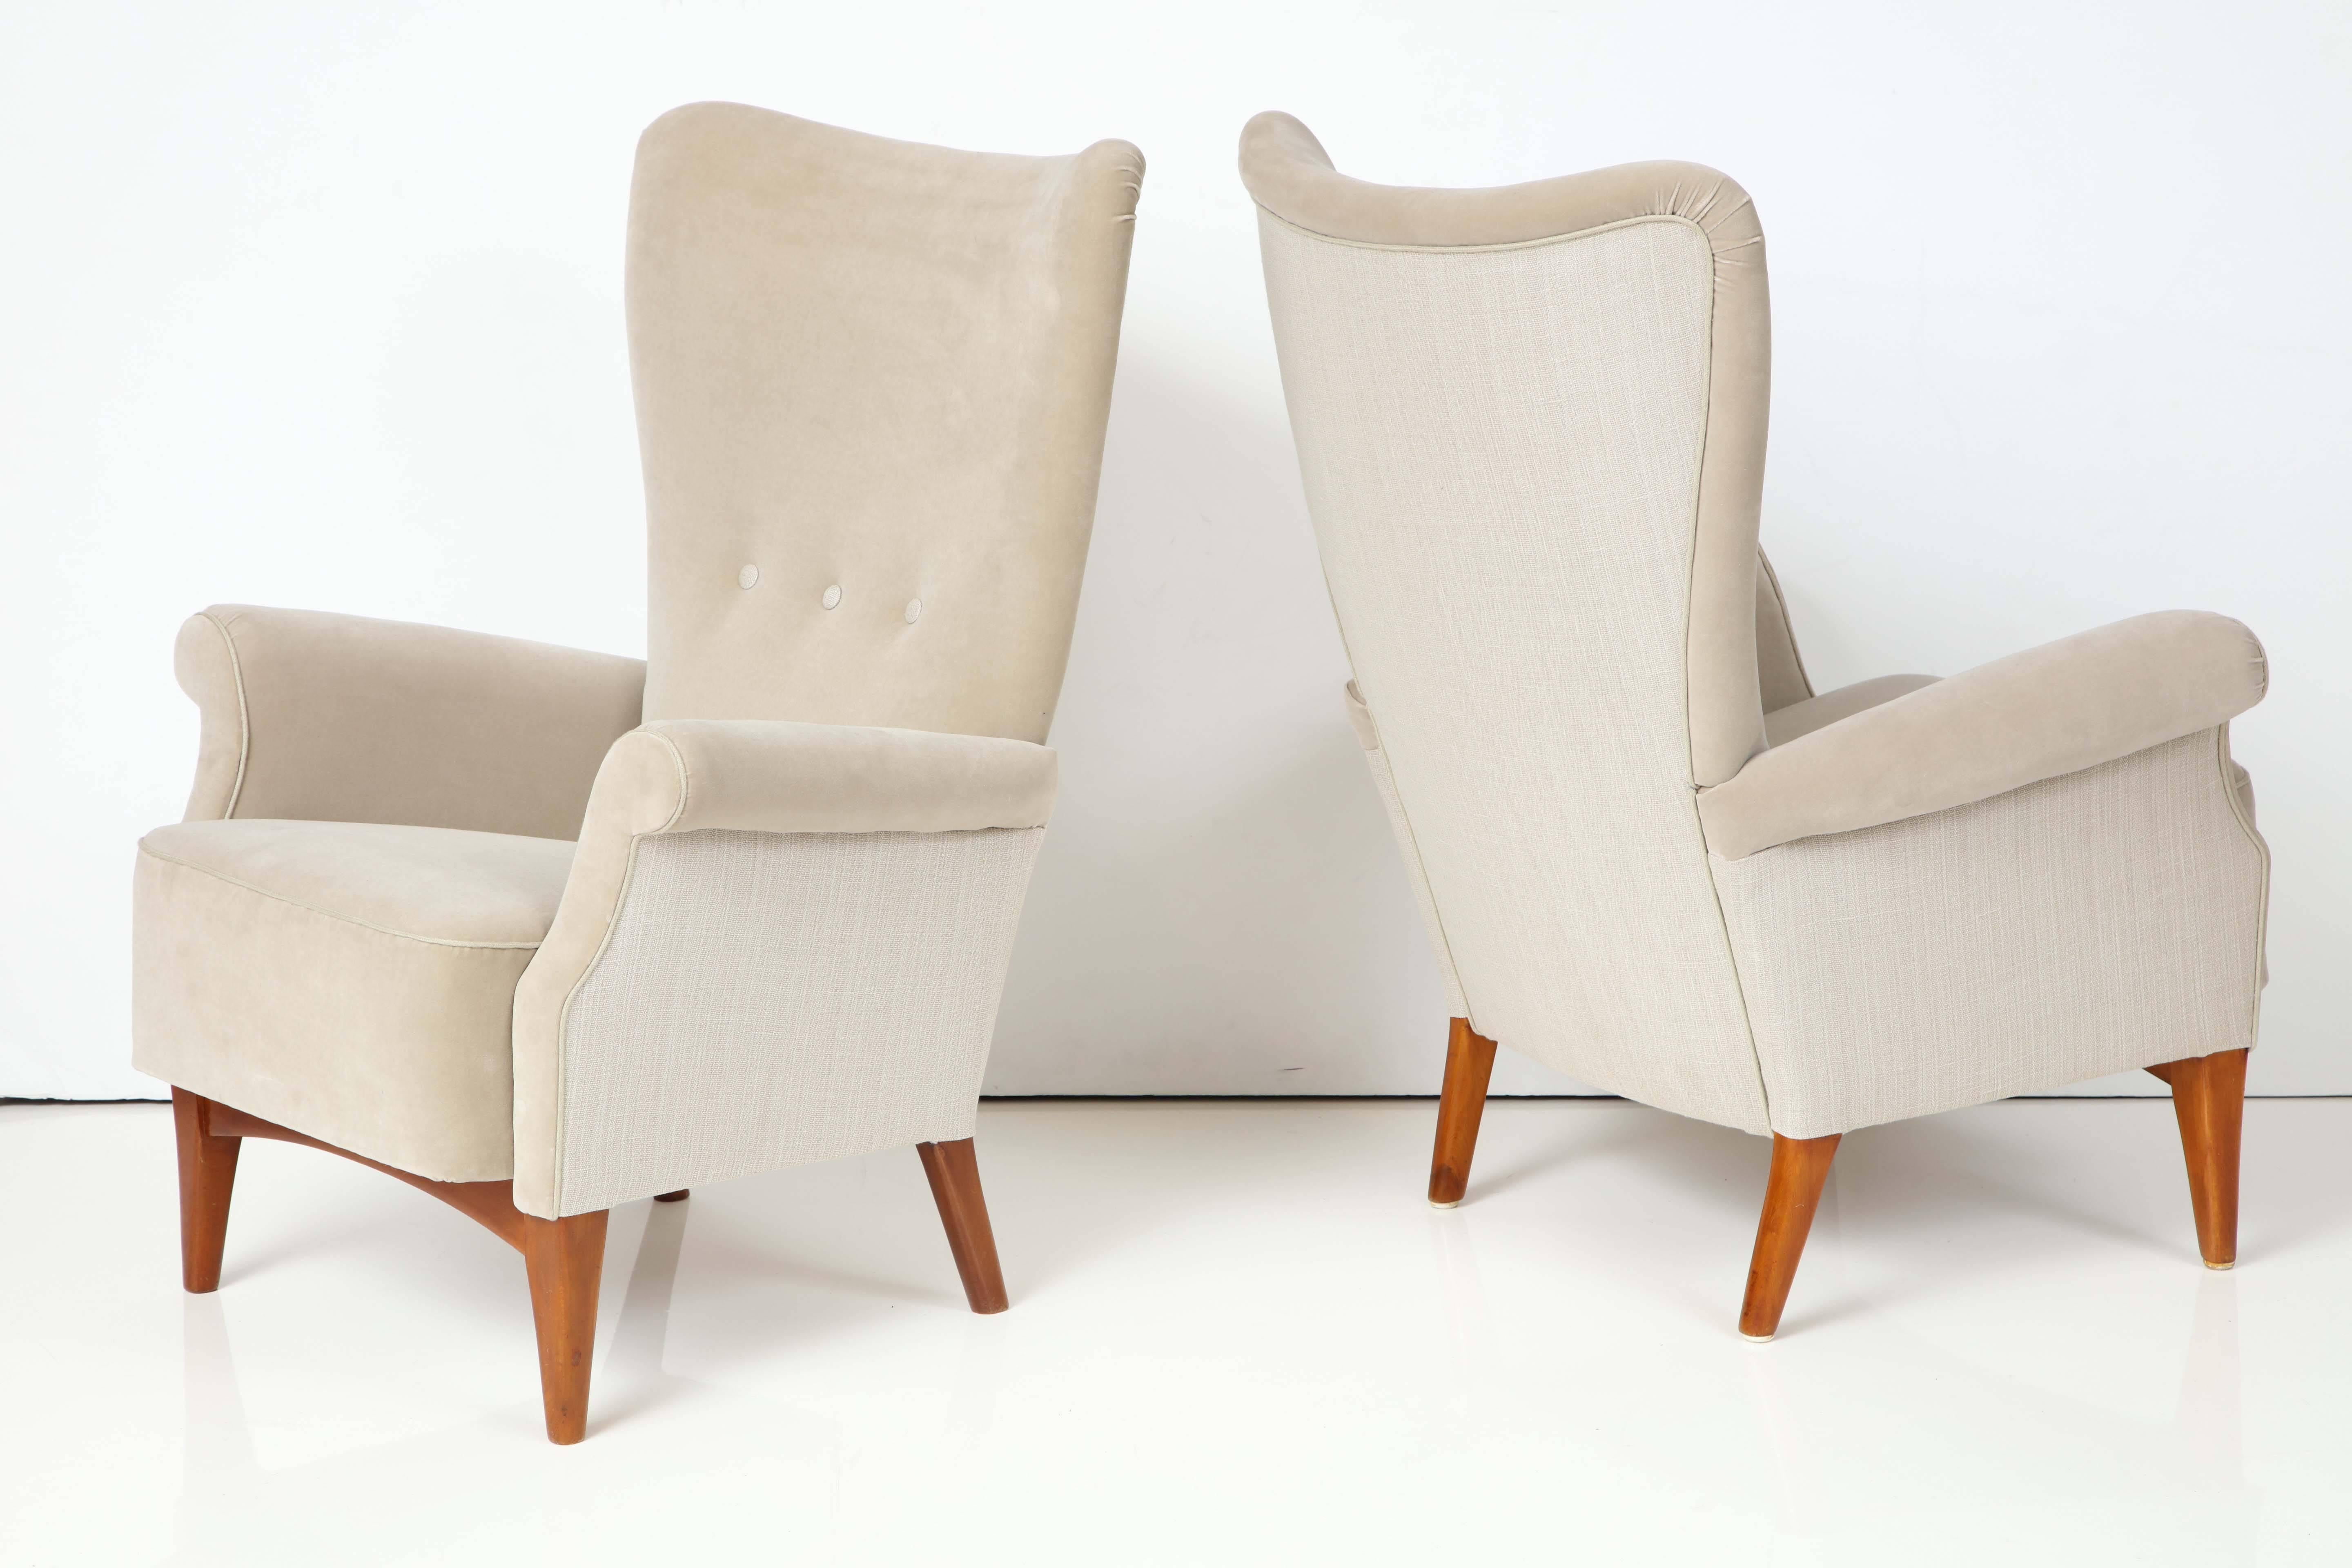 A pair of Danish teak and upholstered highback armchairs, Produced by Fritz Hansen, circa 1940s. Stamped. 8020 series. This model series was design to be fully disassembled without the need for one tool. New two tone upholstery. Very stylish and